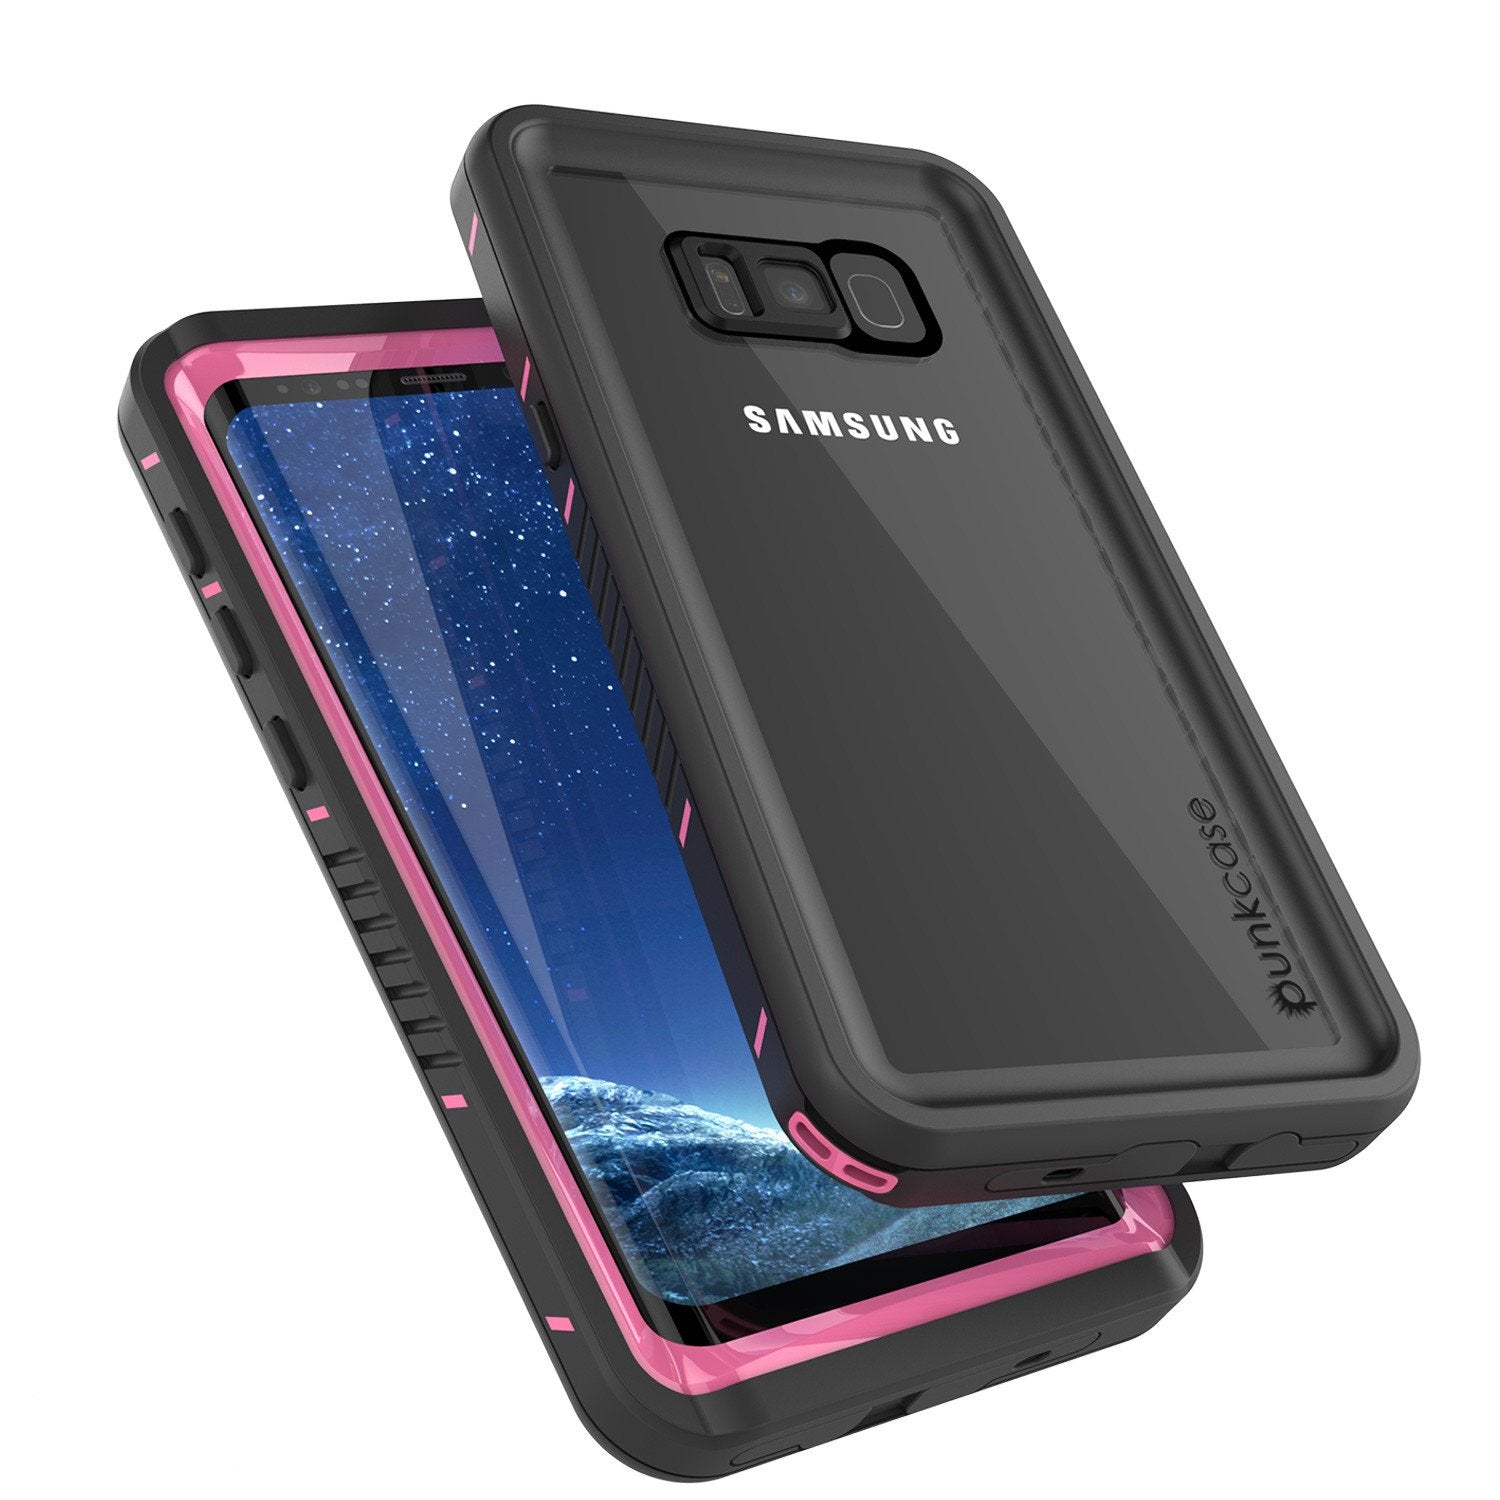 Galaxy S8 Plus Punkcase Extreme Series Slim Fit Armor Case, Pink